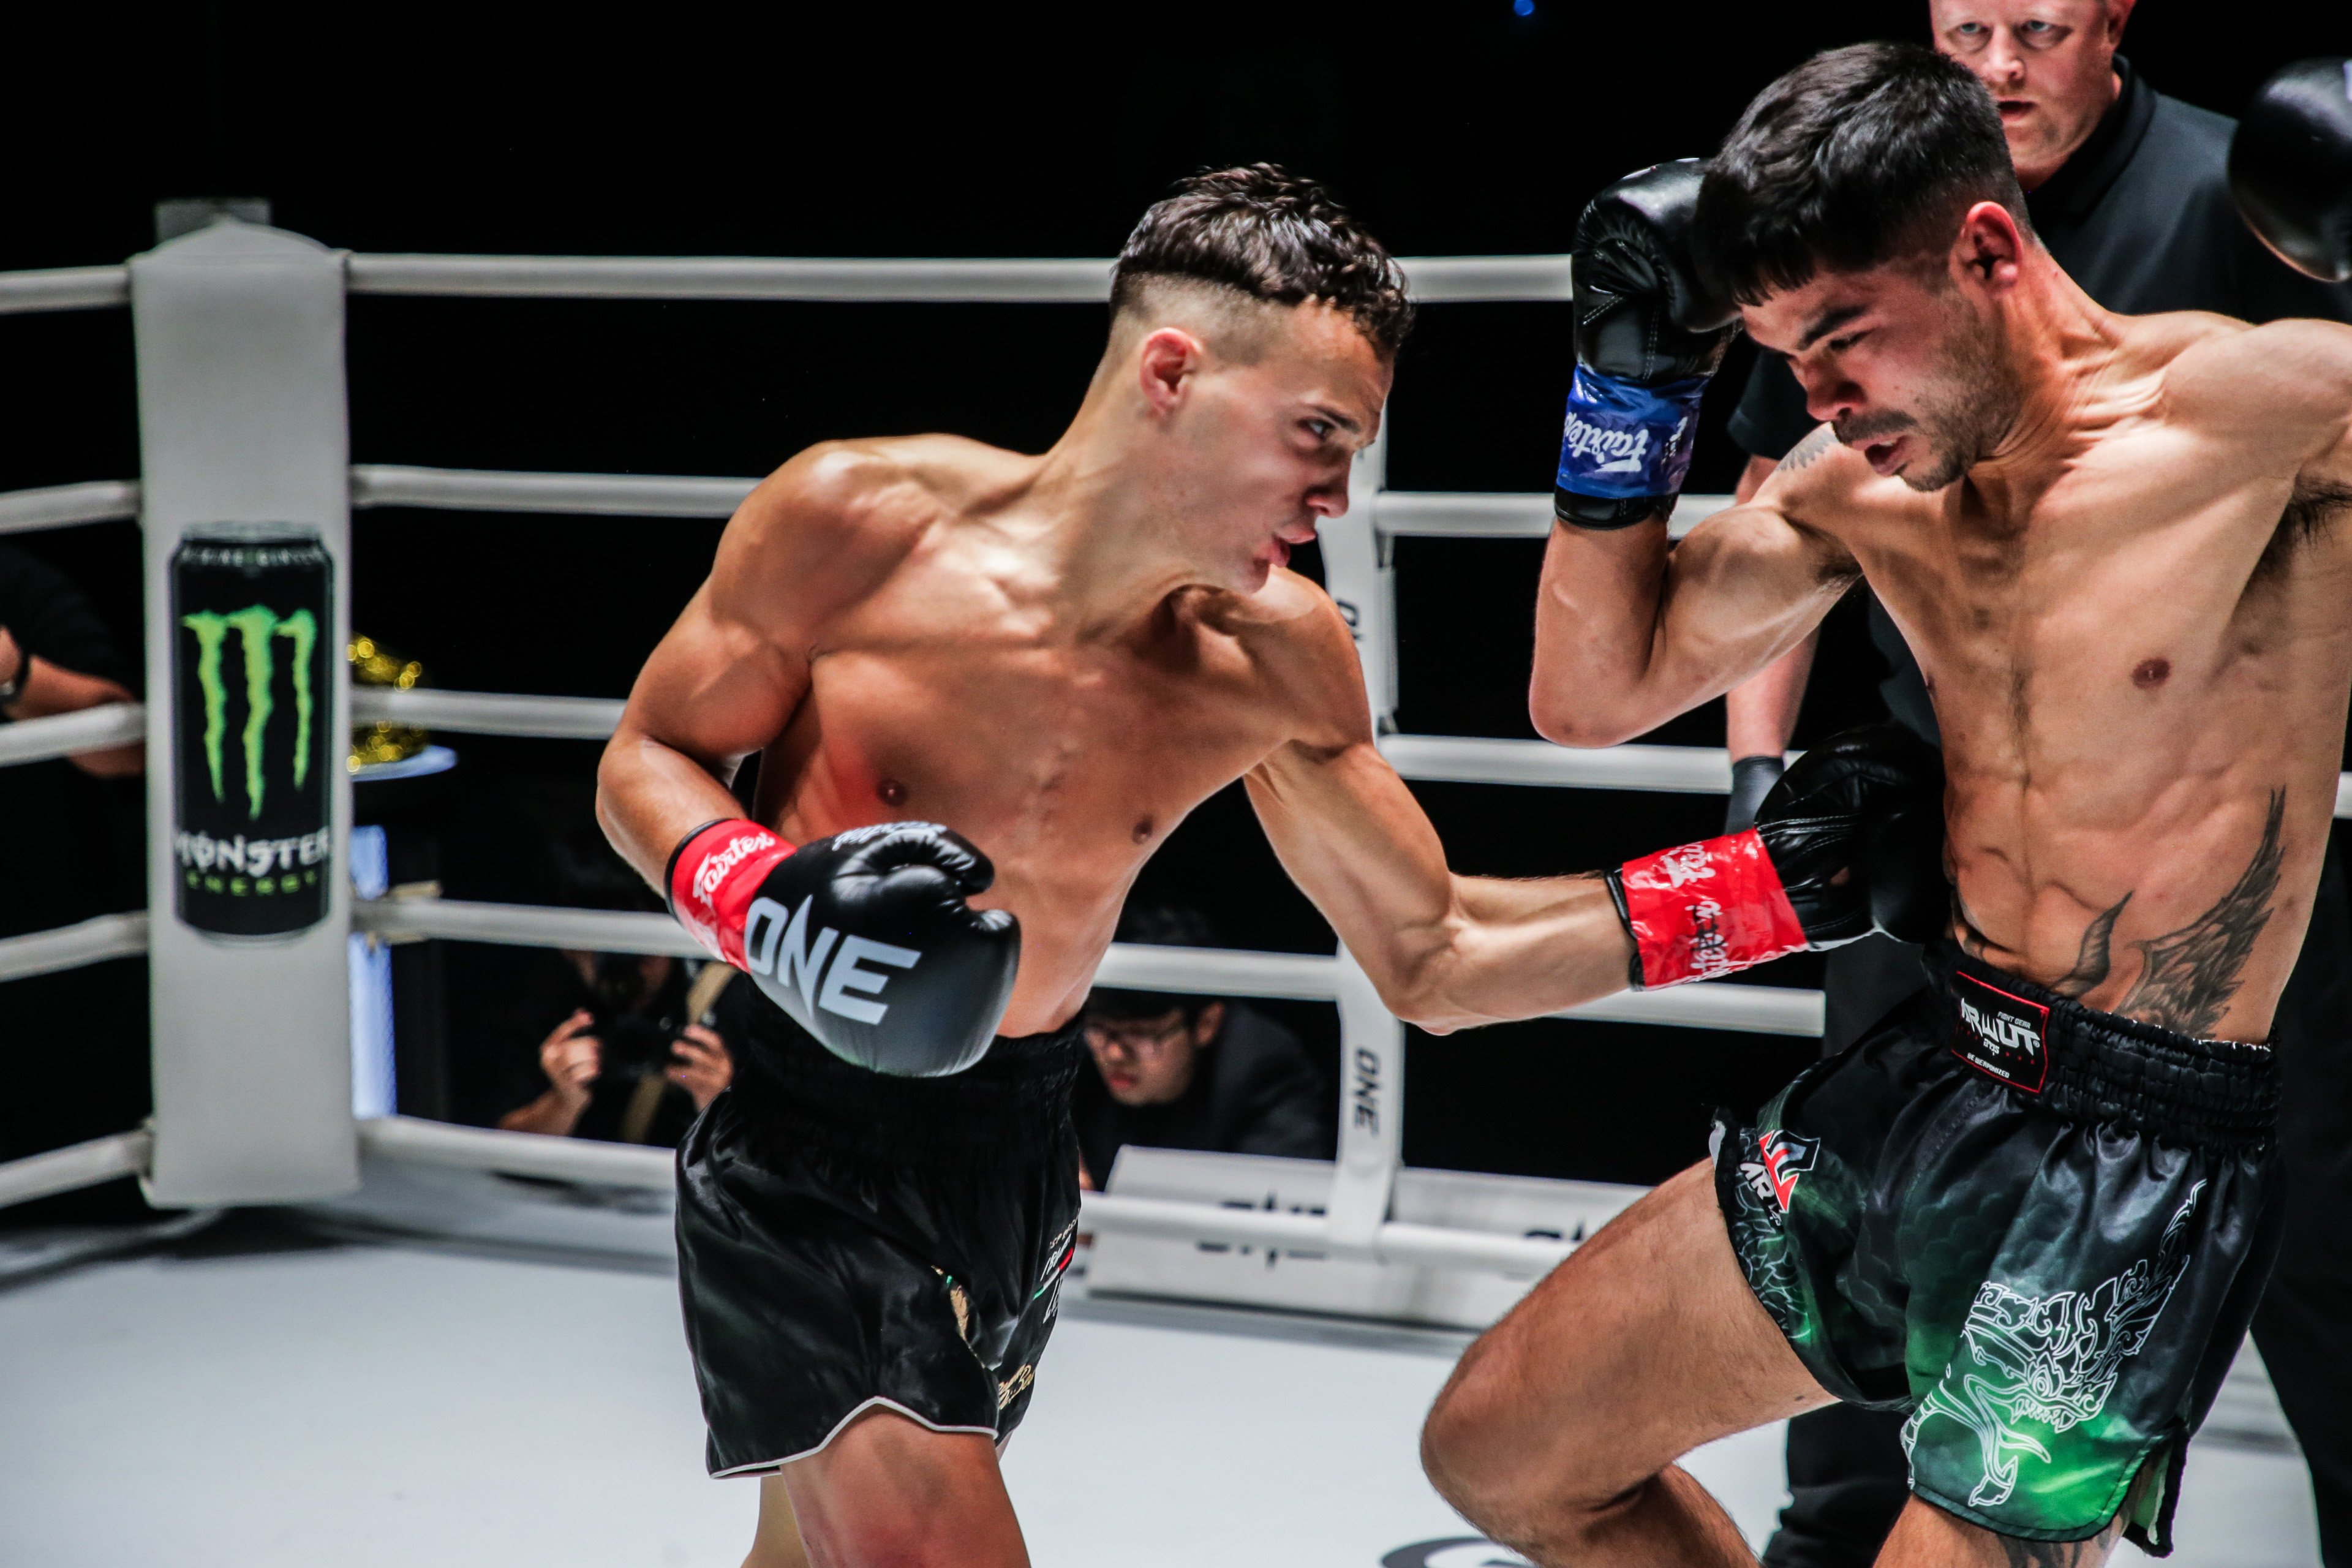 Jonathan Di Bella, shown punching Danial Williams at ONE Fight Night 15,  has never lost a fight but has never fought Prajanchai. Photo: ONE Championship